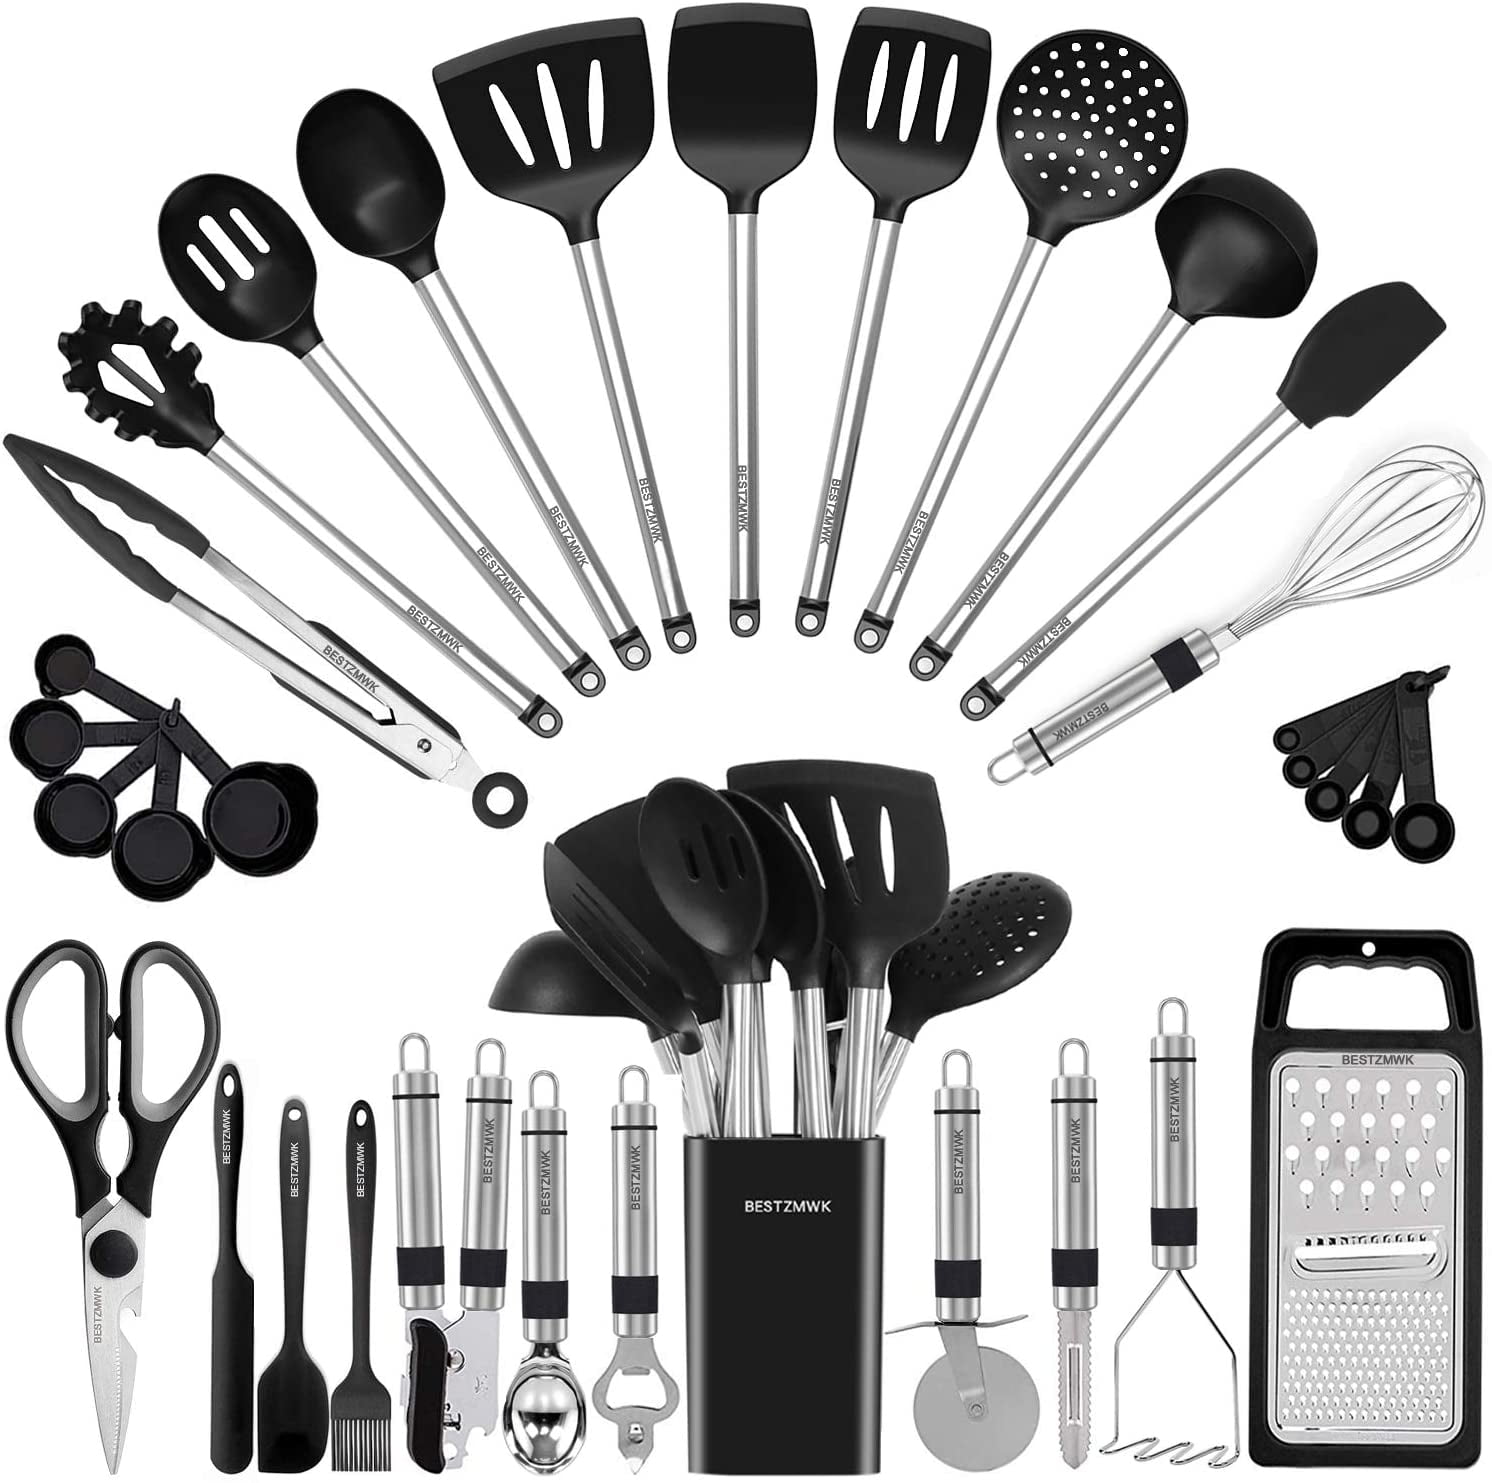 maid-of-honor-utensils-older-style-stainless-and-50-similar-items